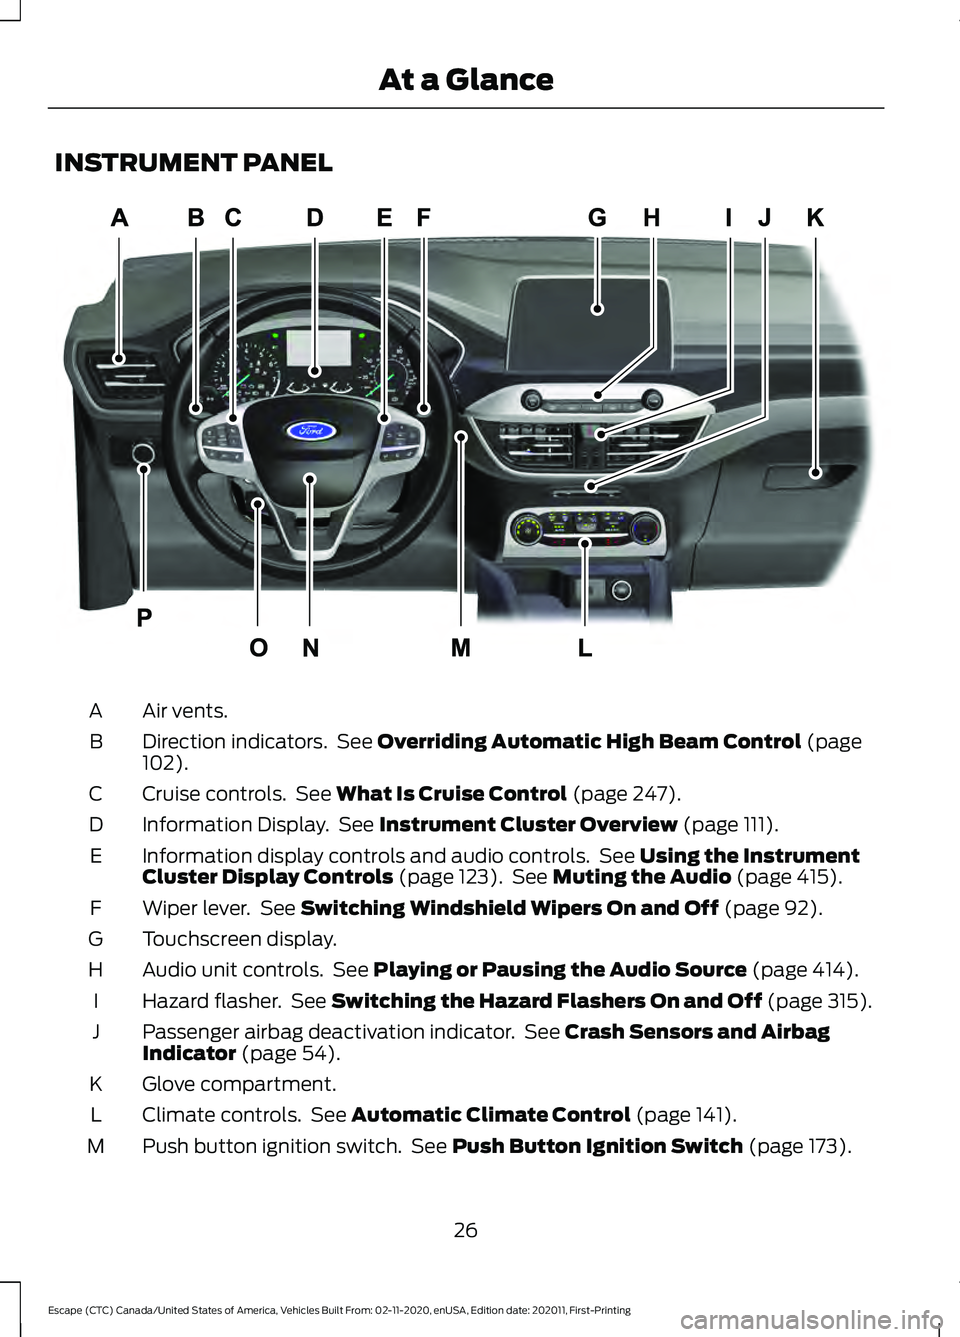 FORD ESCAPE 2021  Owners Manual INSTRUMENT PANEL
Air vents.
A
Direction indicators.  See Overriding Automatic High Beam Control (page
102).
B
Cruise controls.  See 
What Is Cruise Control (page 247).
C
Information Display.  See 
Ins